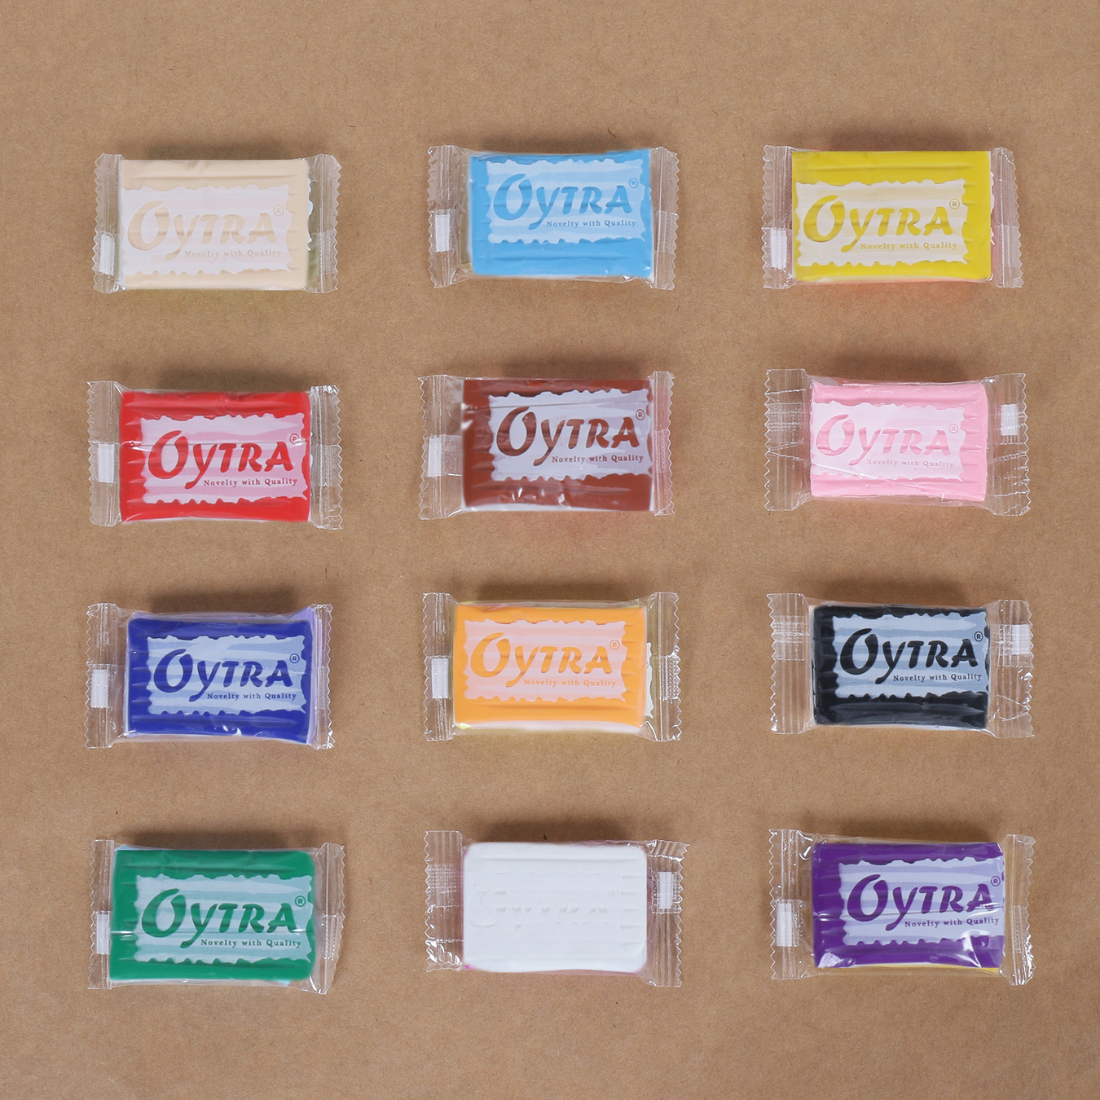 Oven Baked Polymer Clay Accessories - Oytra Tagged Sponge Tools